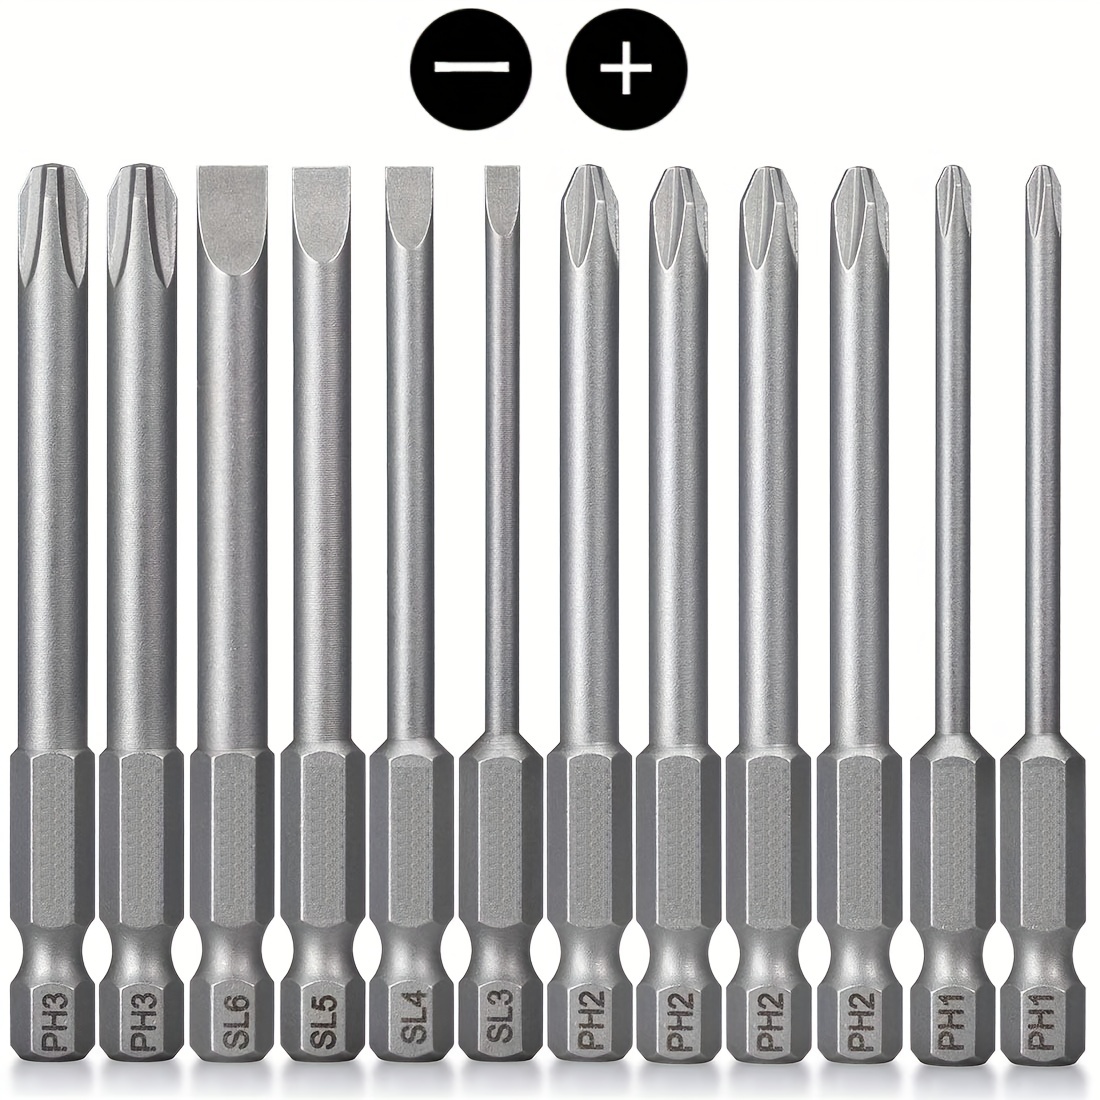 

12pcs Slotted Phillips Screwdriver Bit Set, 1/4 Inches Hex Shank S2 Steel Magnetic 3 Inch Long Drill Bits